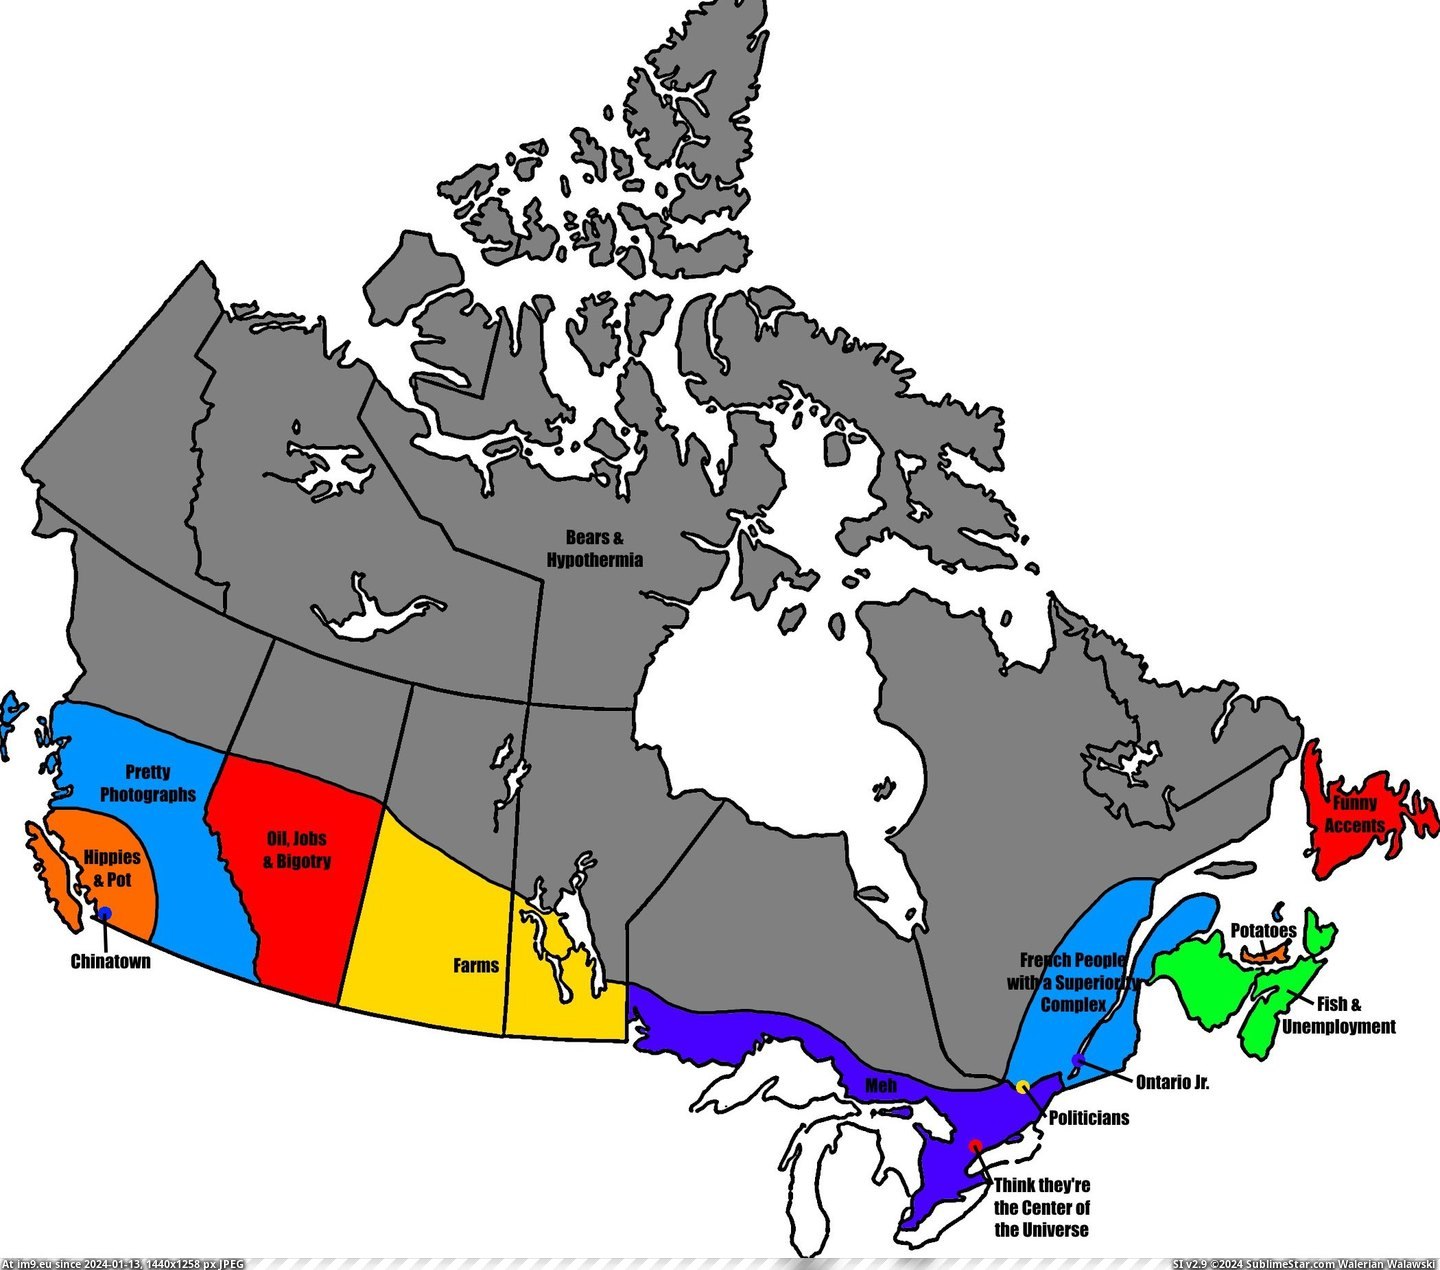 #Thought #Canada #France #Stereotypes #Stereotype #Popular #Maps #Nova [Mapporn]  Since the UK and France stereotype maps were so popular I thought I'd do my home. Stereotypes of Canada from a Nova S Pic. (Obraz z album My r/MAPS favs))